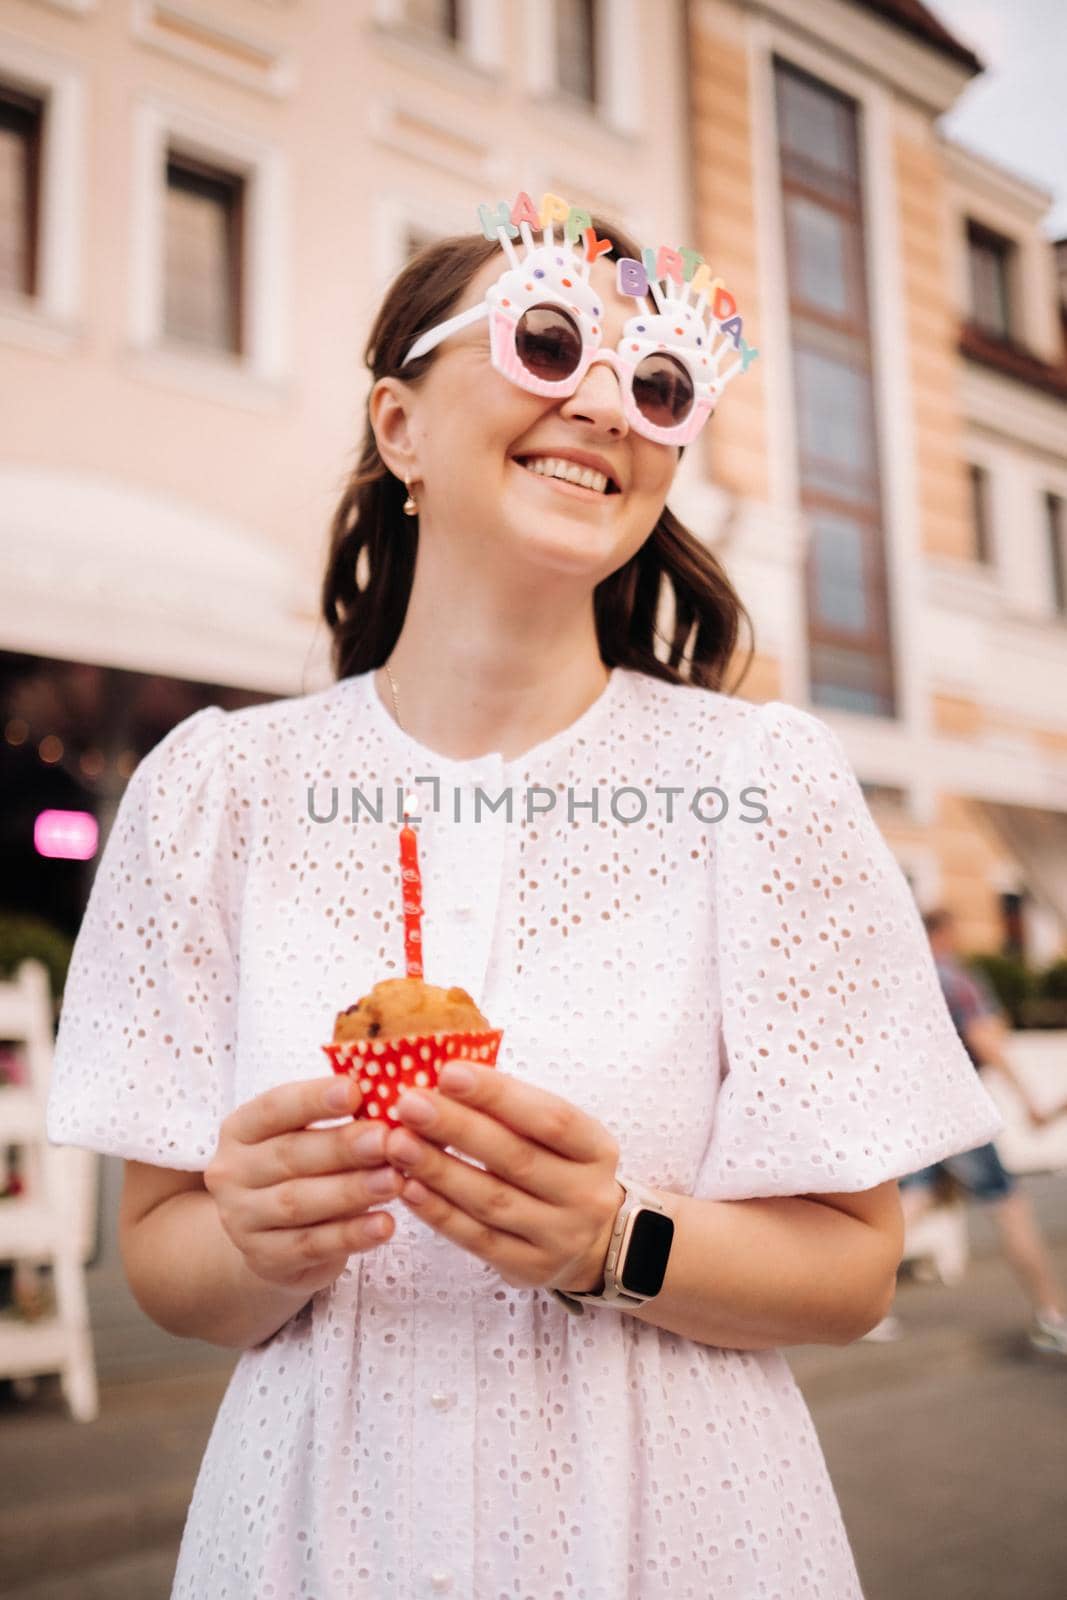 A beautiful happy woman in a white dress holds a cake in her hands on the street of the city celebrating her birthday.